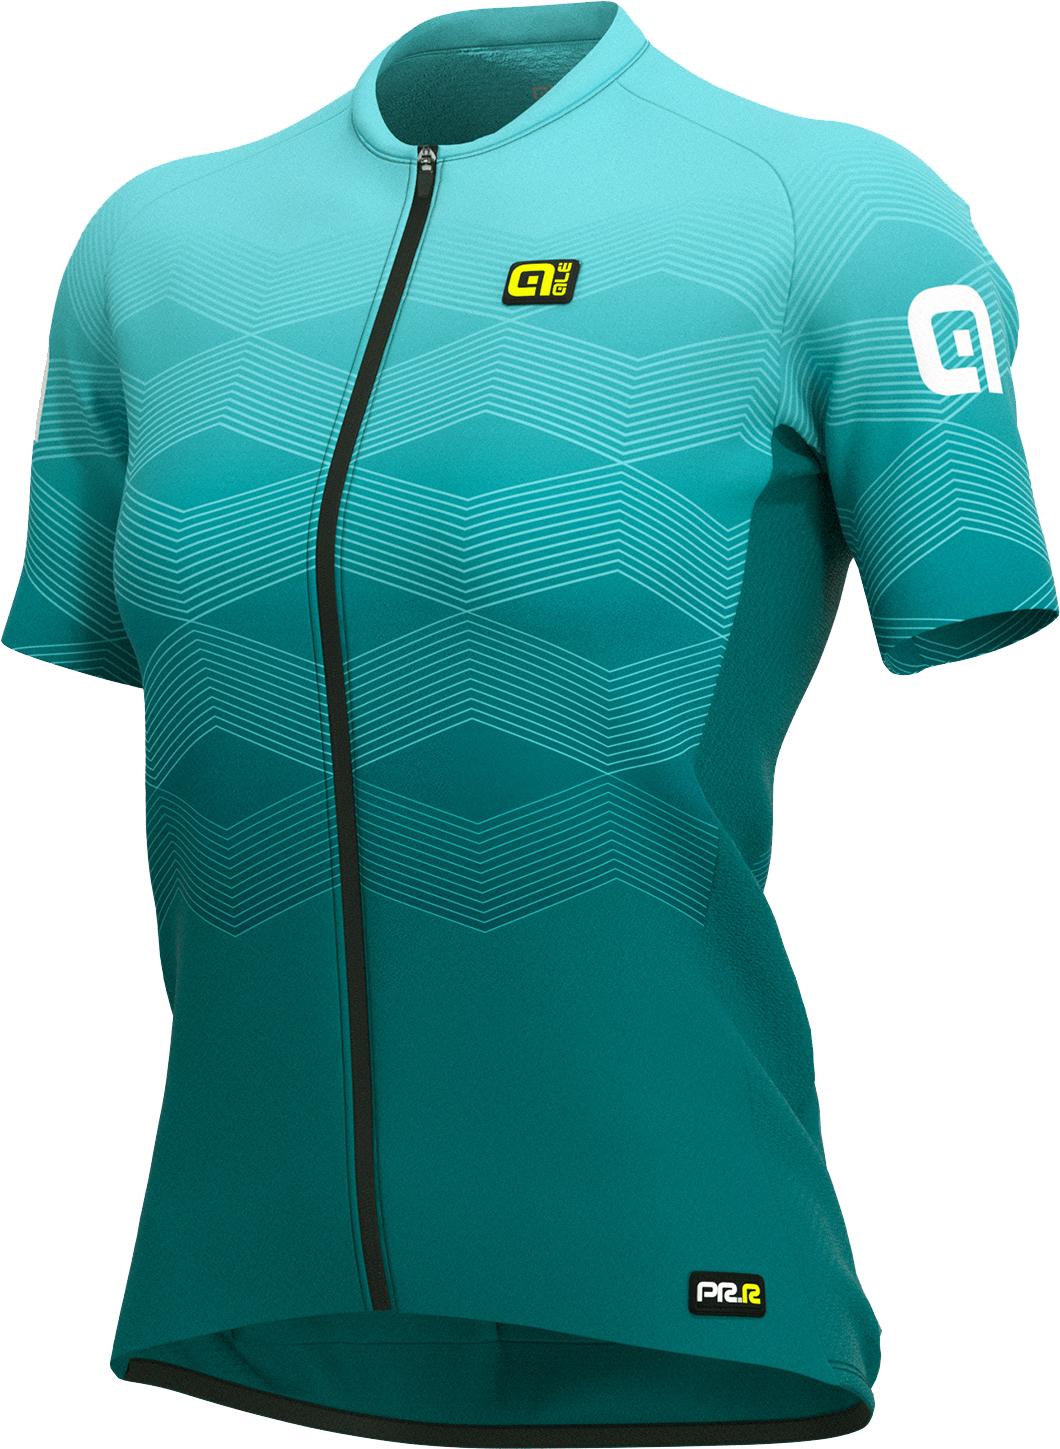 Al Womens Prr Magnitude Cycling Jersey - Turquoise